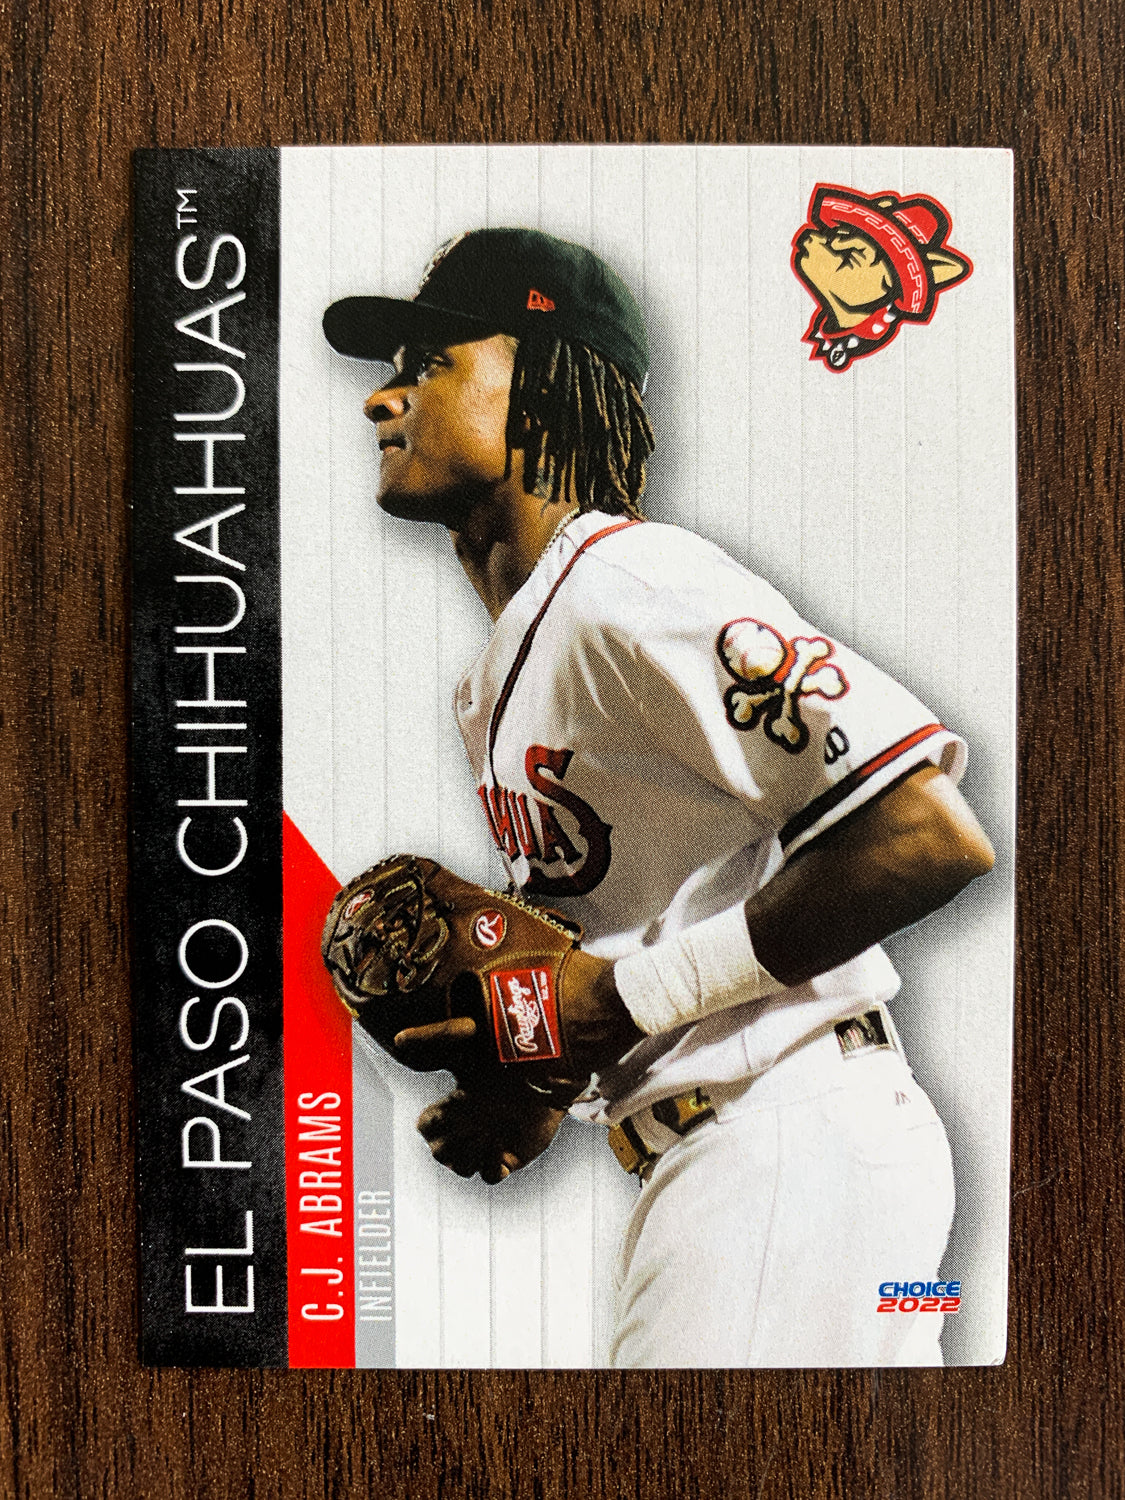 Best of luck to CJ Abrams and - El Paso Chihuahuas